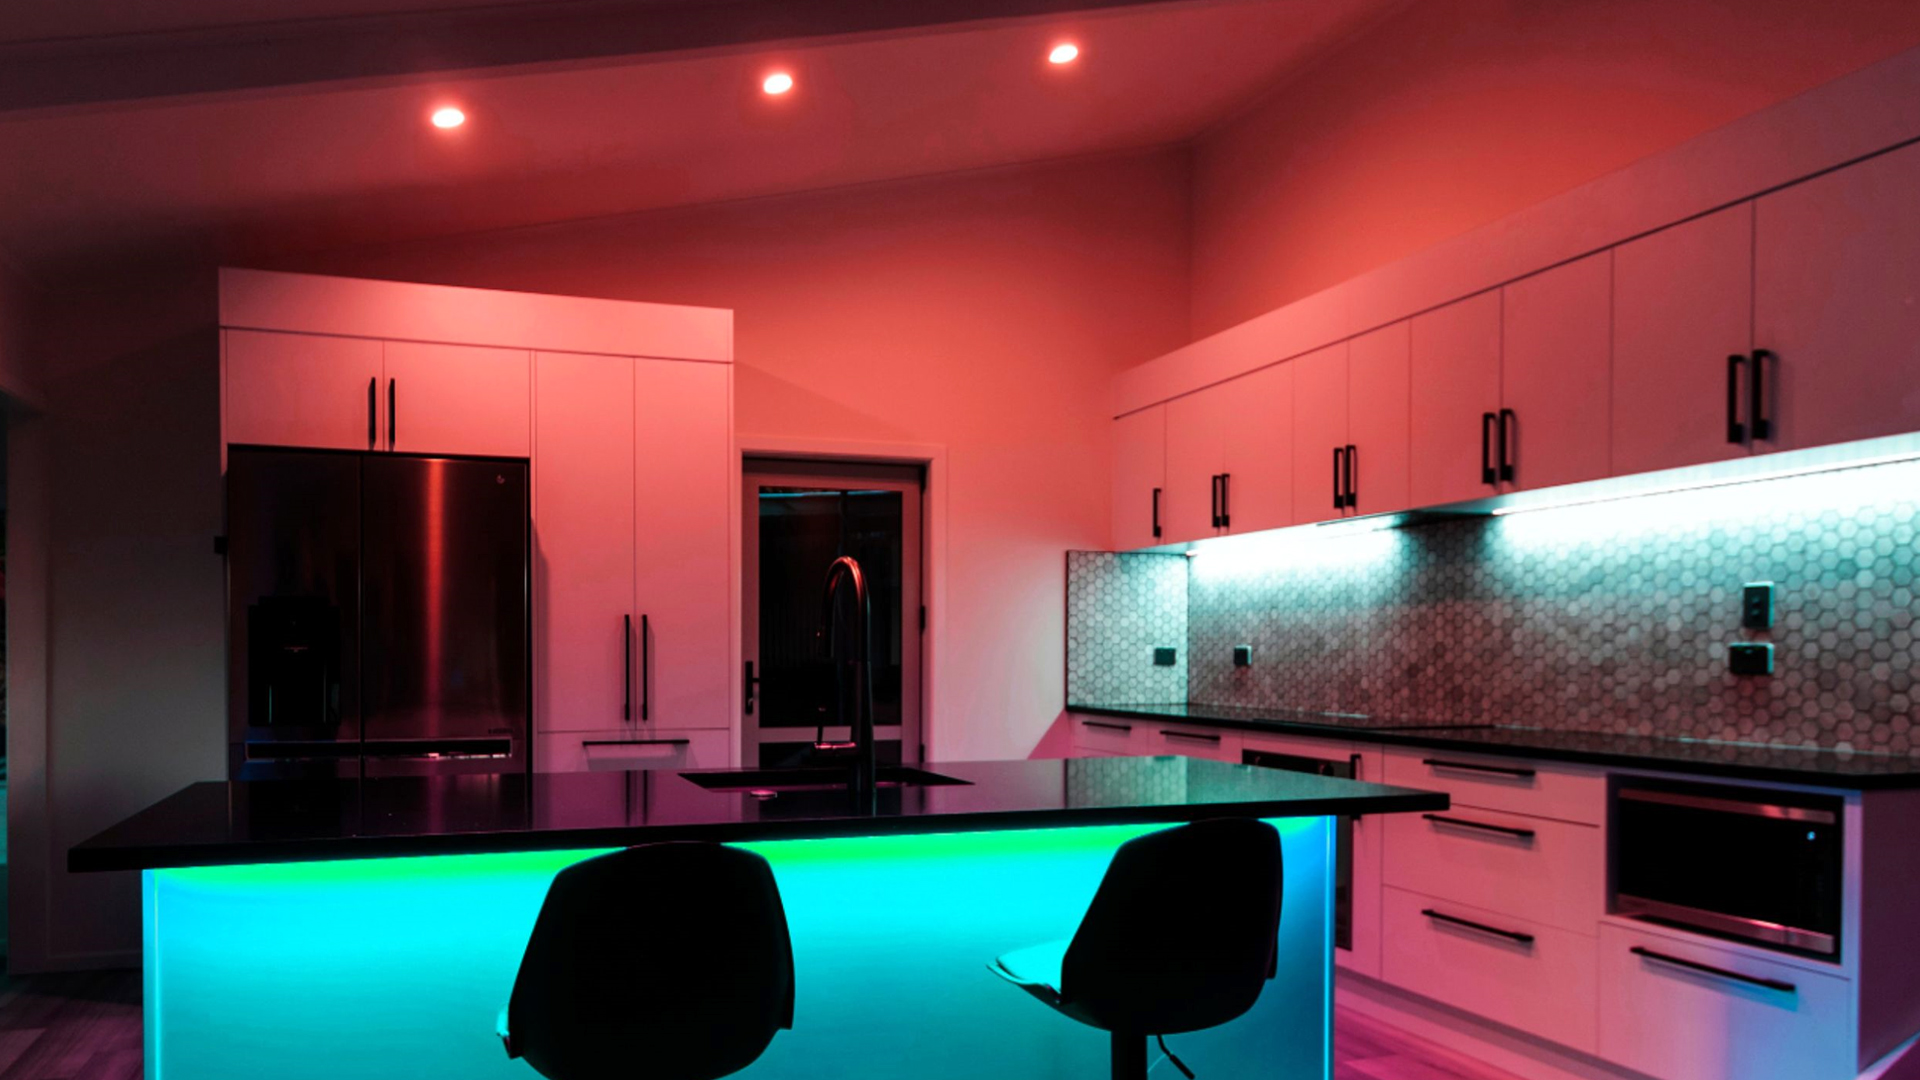 A kitchen lit up with LIFX smart bulbs and lightstrips